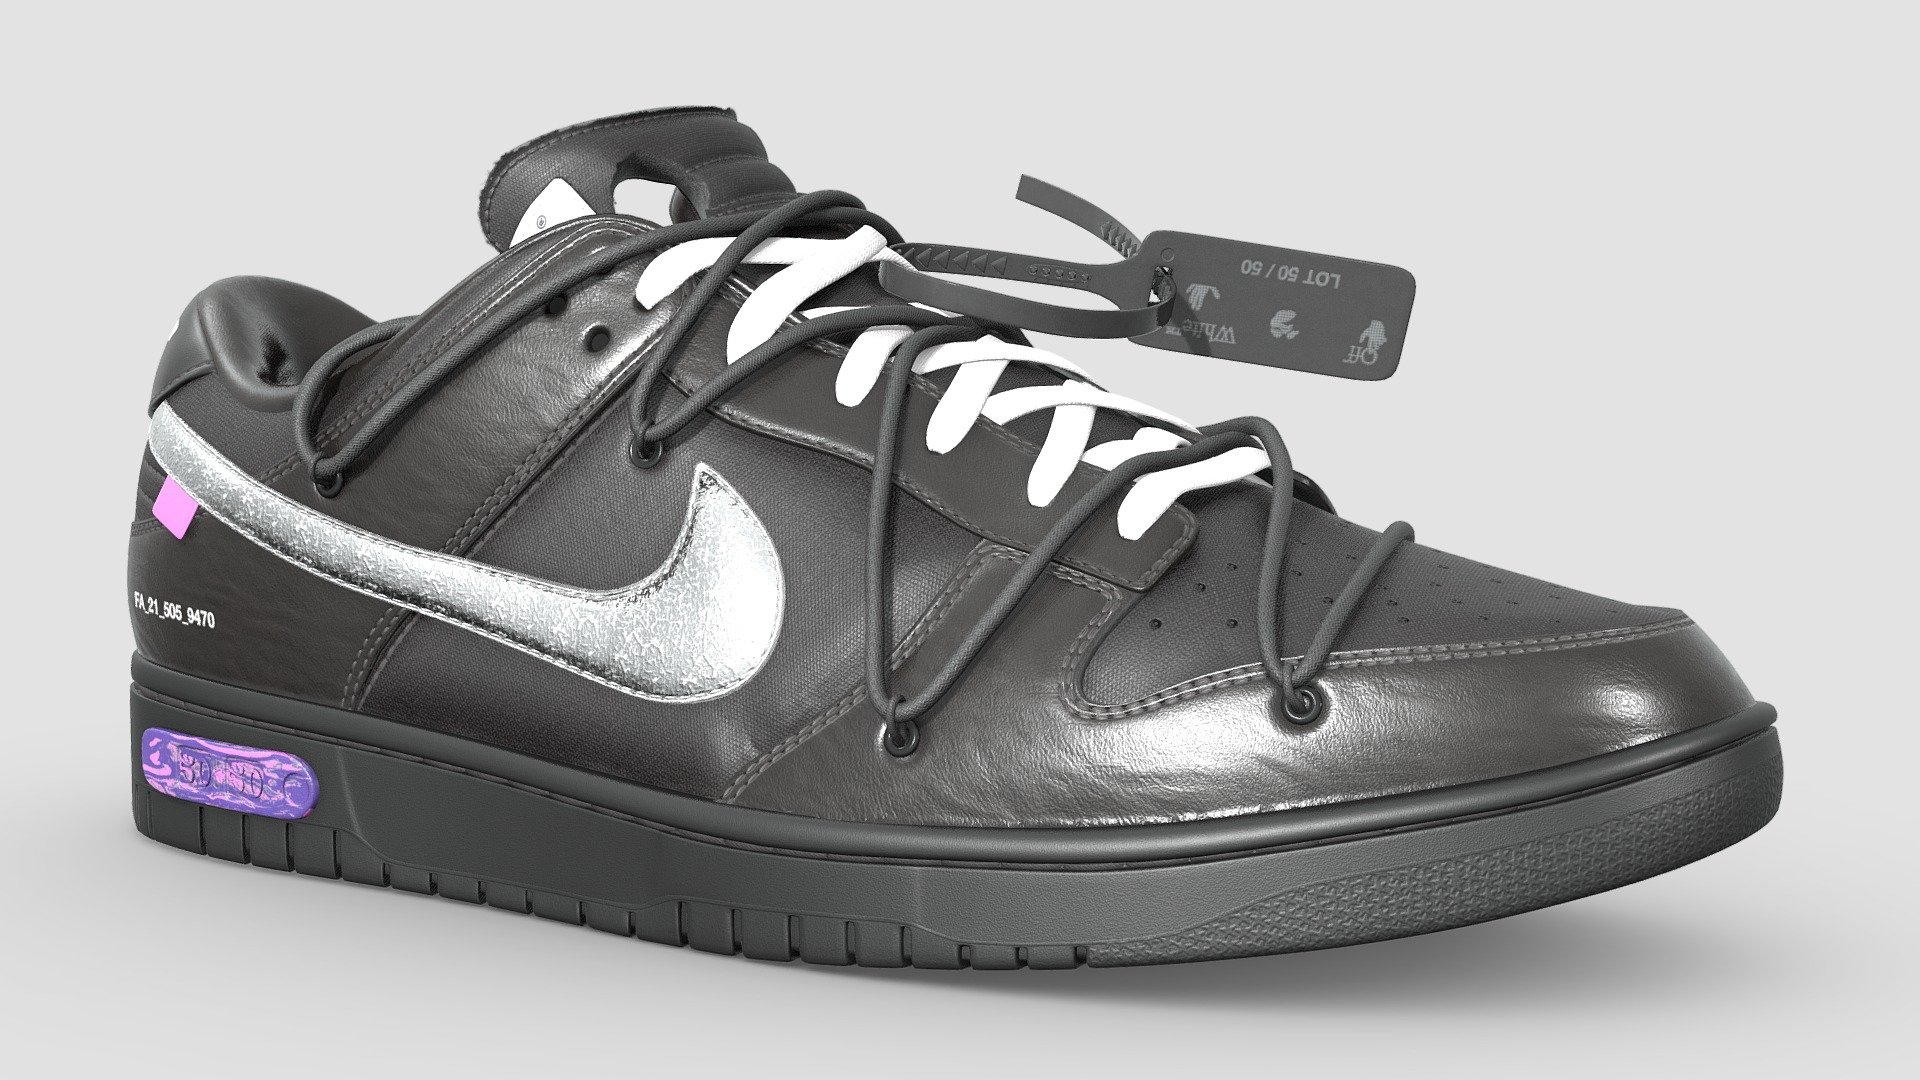 Off White collaboration with Nike on a Dunk Low, made in Blender, textured in Substance. Released in 2021. Panels of black leather complement black canvas, all highlighted by a metallic swoosh and accents of purple.

Every detail was made in the recreation of this shoe, from the text on the medial side of the shoe to the subtlety of each material, nothing went overlooked. Stitches were sculpted by hand to achieve the highest quality, and the frayed edge on the tongue of the shoe was created such that there would be no gap between the canvas fabric and foam

What's included Firstly, two versions of this model. The base version with 4 texture sets, and a One Mesh version that uses only 1 texture set. Both models are identical, only how they are unwrapped is different. There are two texture sets, with 4 maps, namely: Base Color, Metallic, Normal, and Roughness. I have included several other versions, such as High and Low Poly shoes All textures are 4096x4096. Meaning the One Mesh version has 4 2048x2048 textures - Nike Dunk x Off White Lot 50 - Buy Royalty Free 3D model by Joe-Wall (@joewall) 3d model